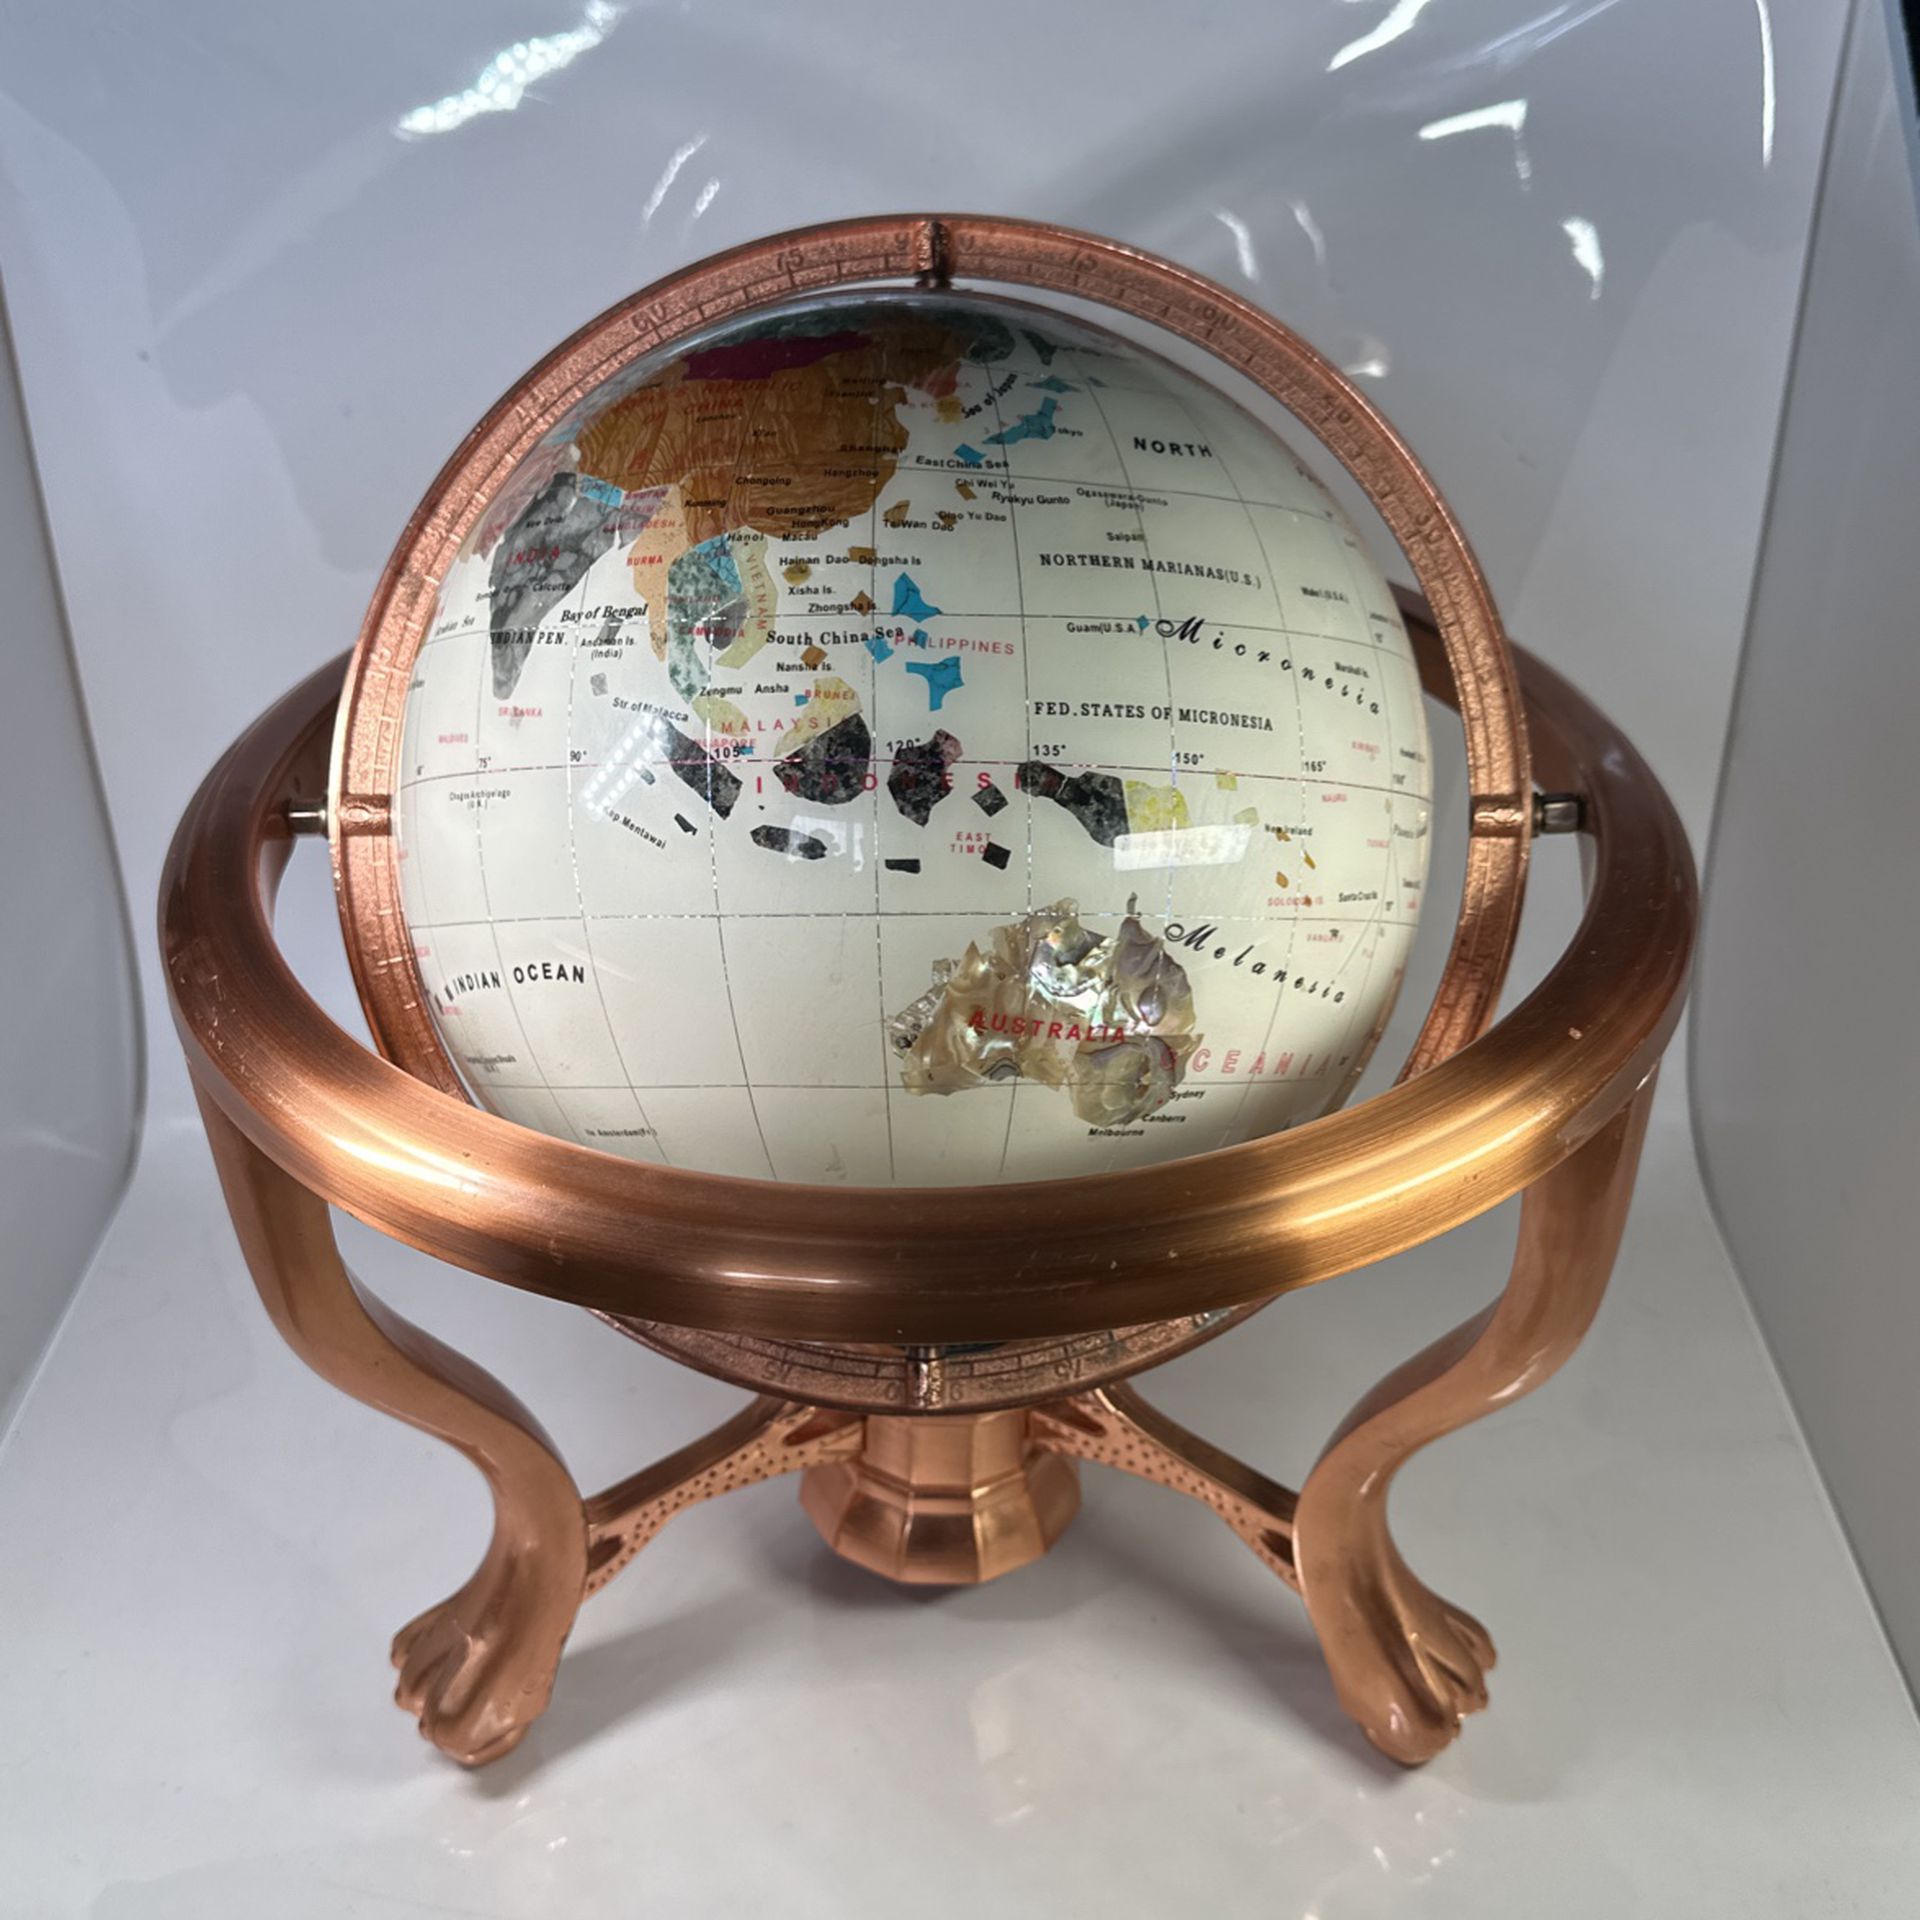 Unique Art 10-Inch Tall Table Top Pearl Ocean Gemstone World Globe with Copper